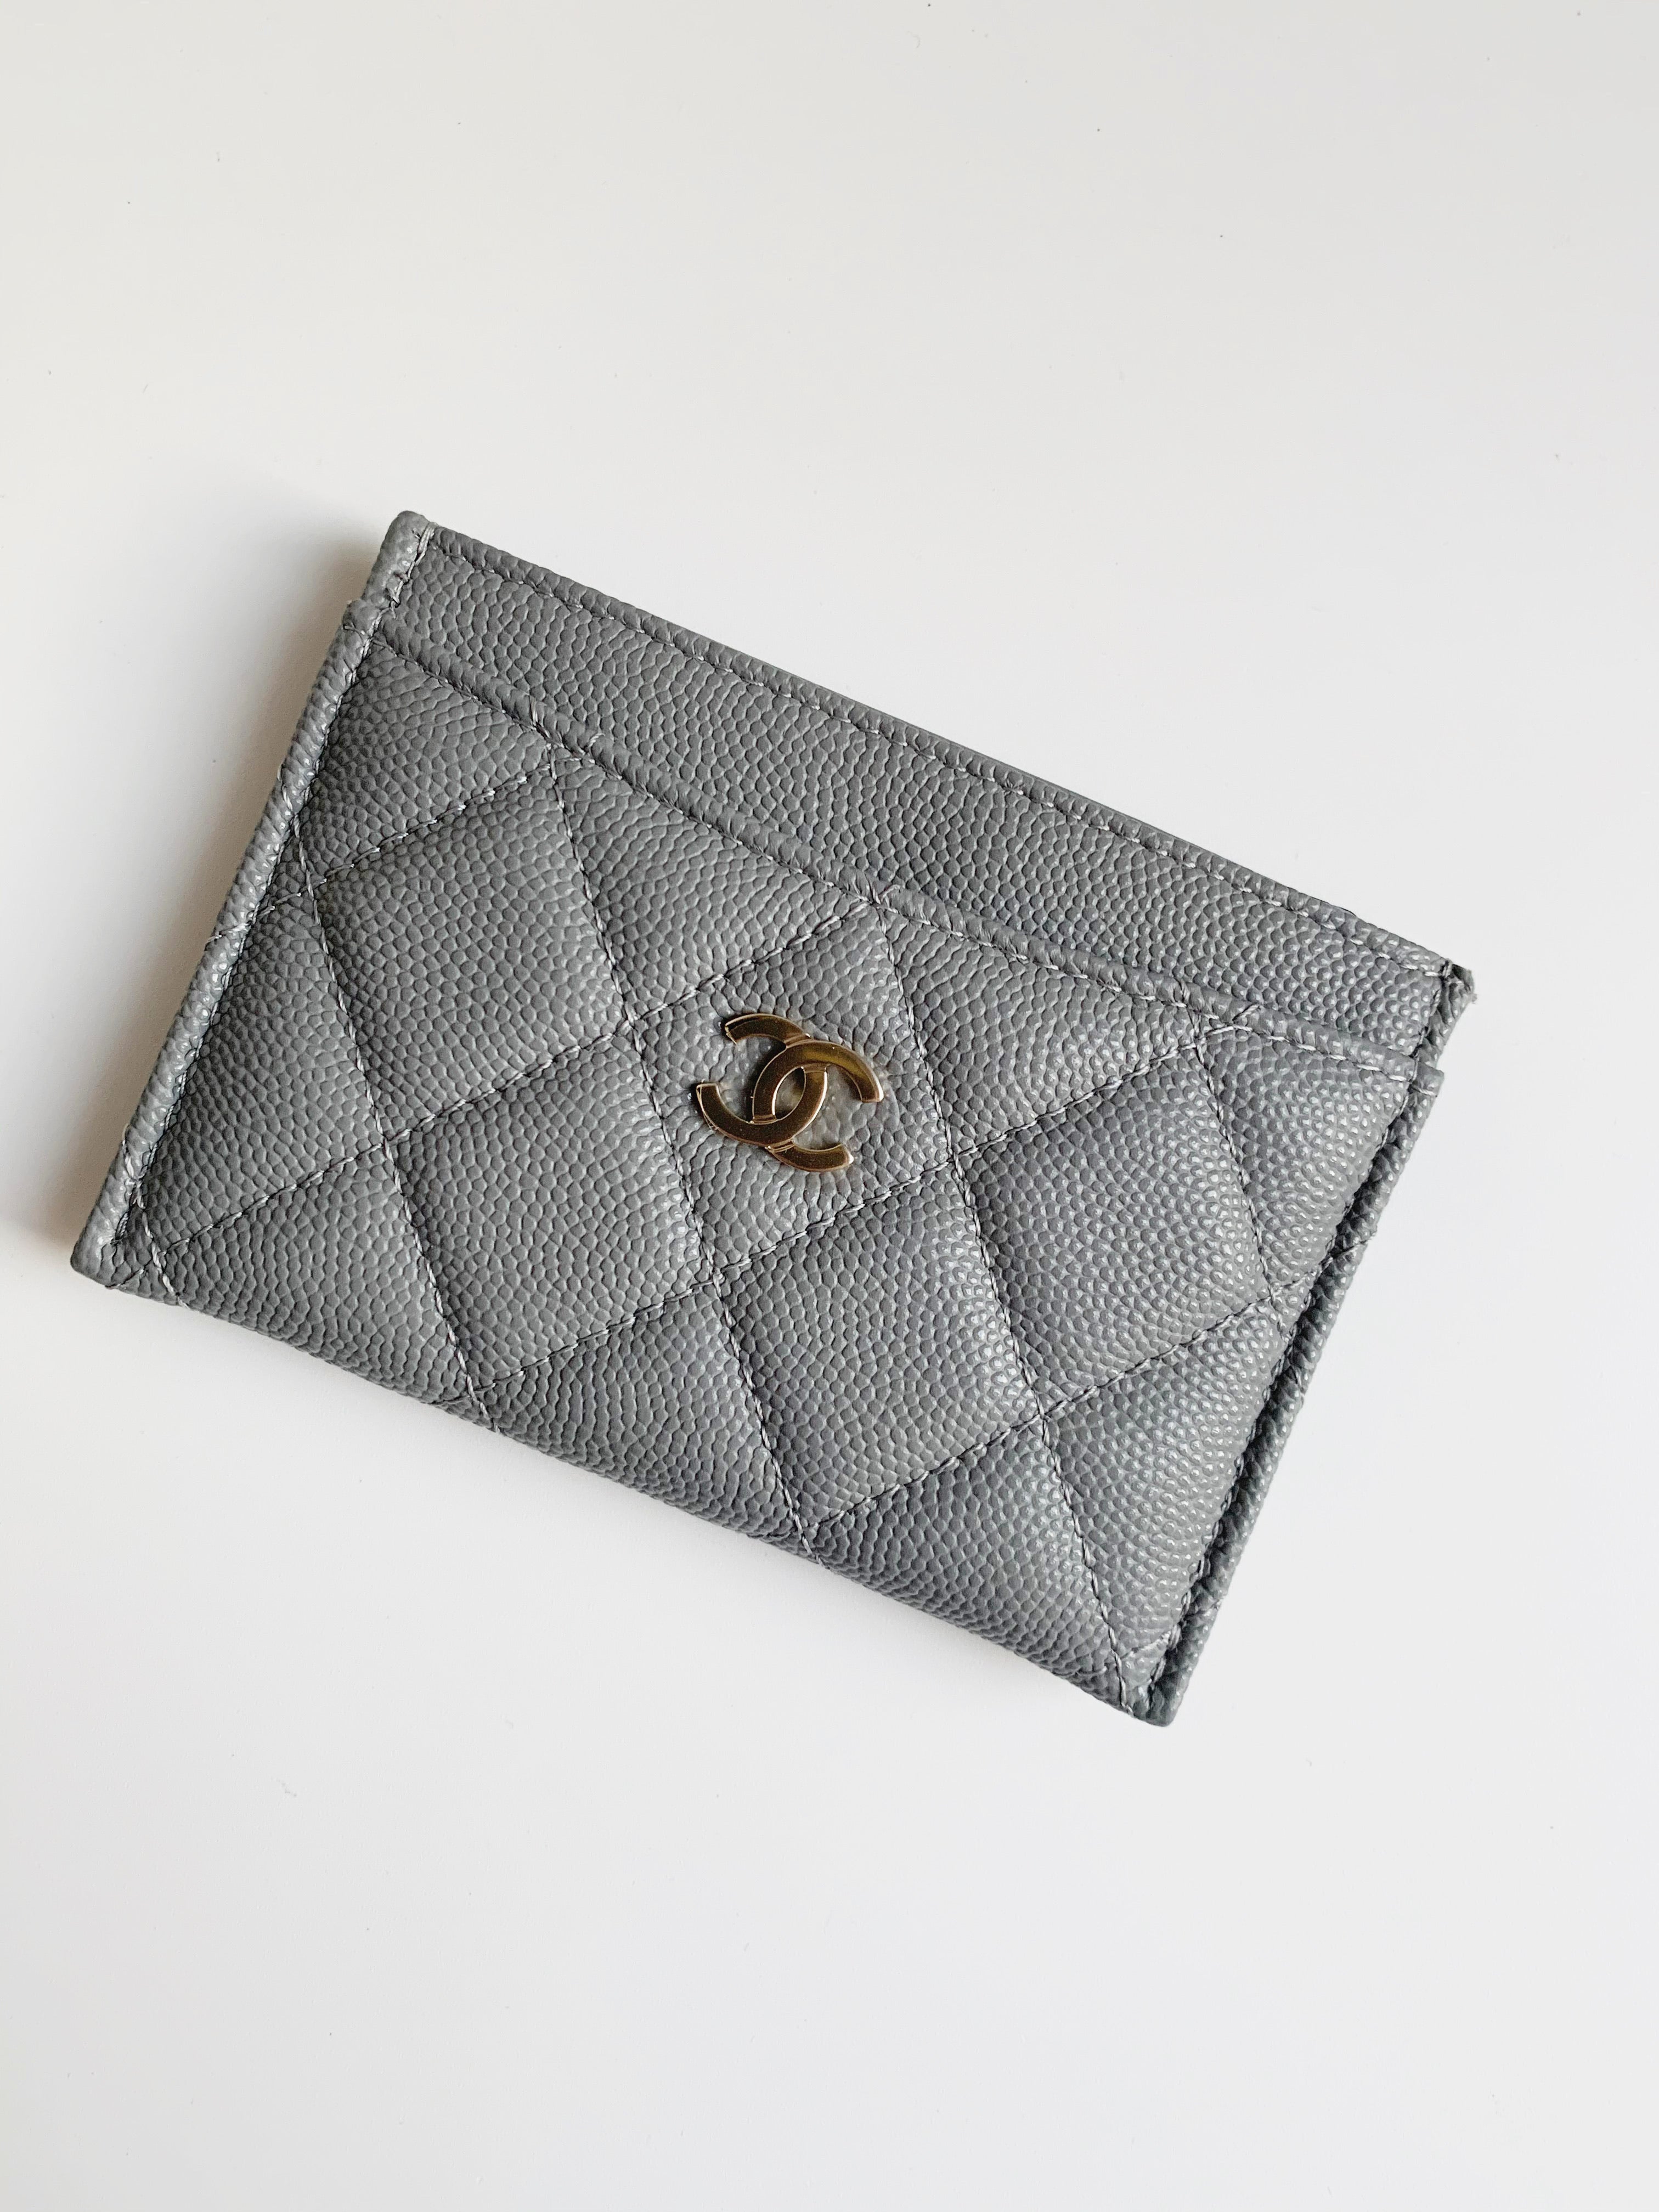 Chanel White Caviar Leather Wallet on Chain Clutch Bag - Yoogi's Closet